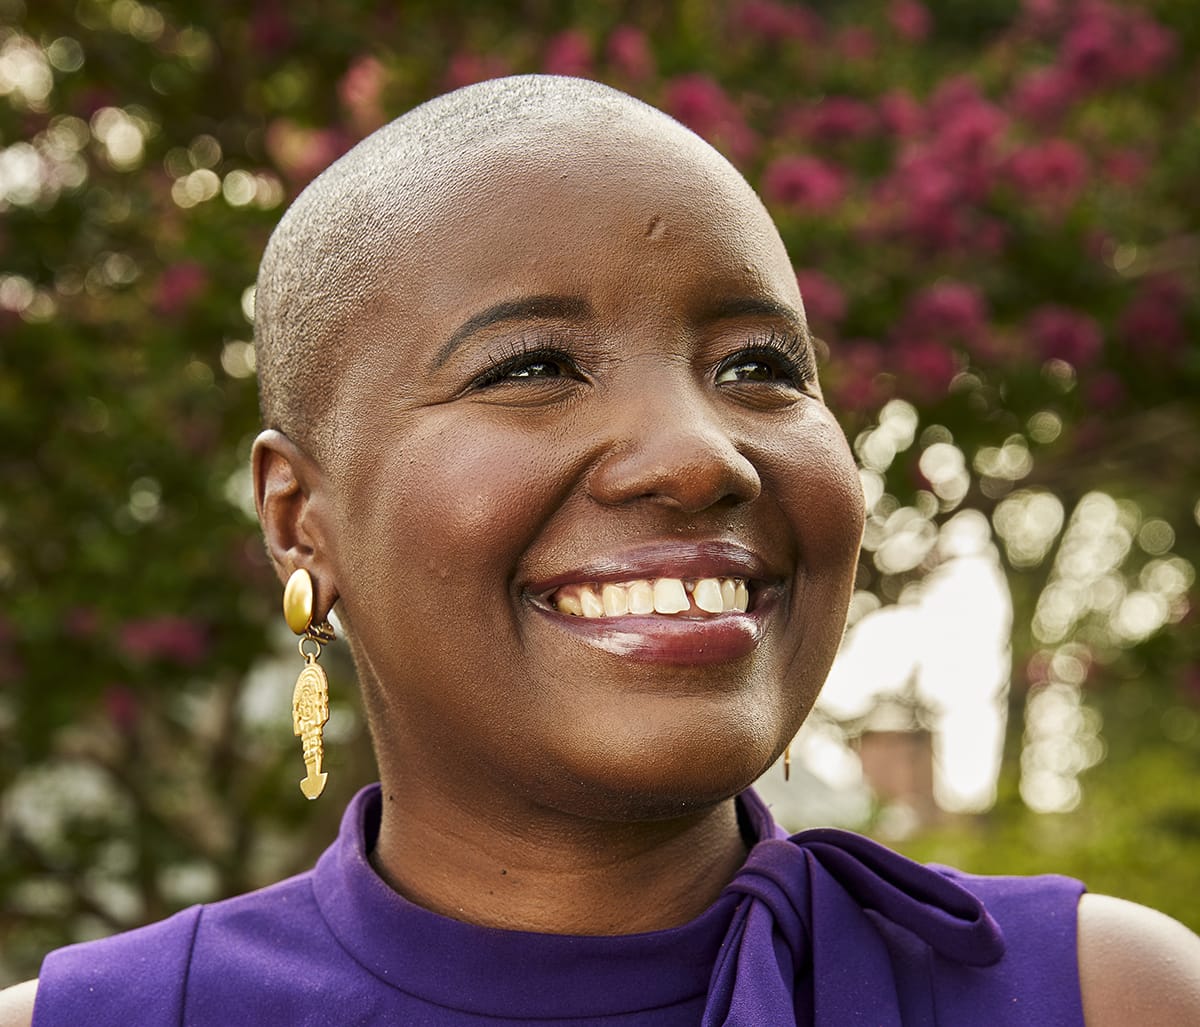 A woman with a shaved head smiling in a purple dress.